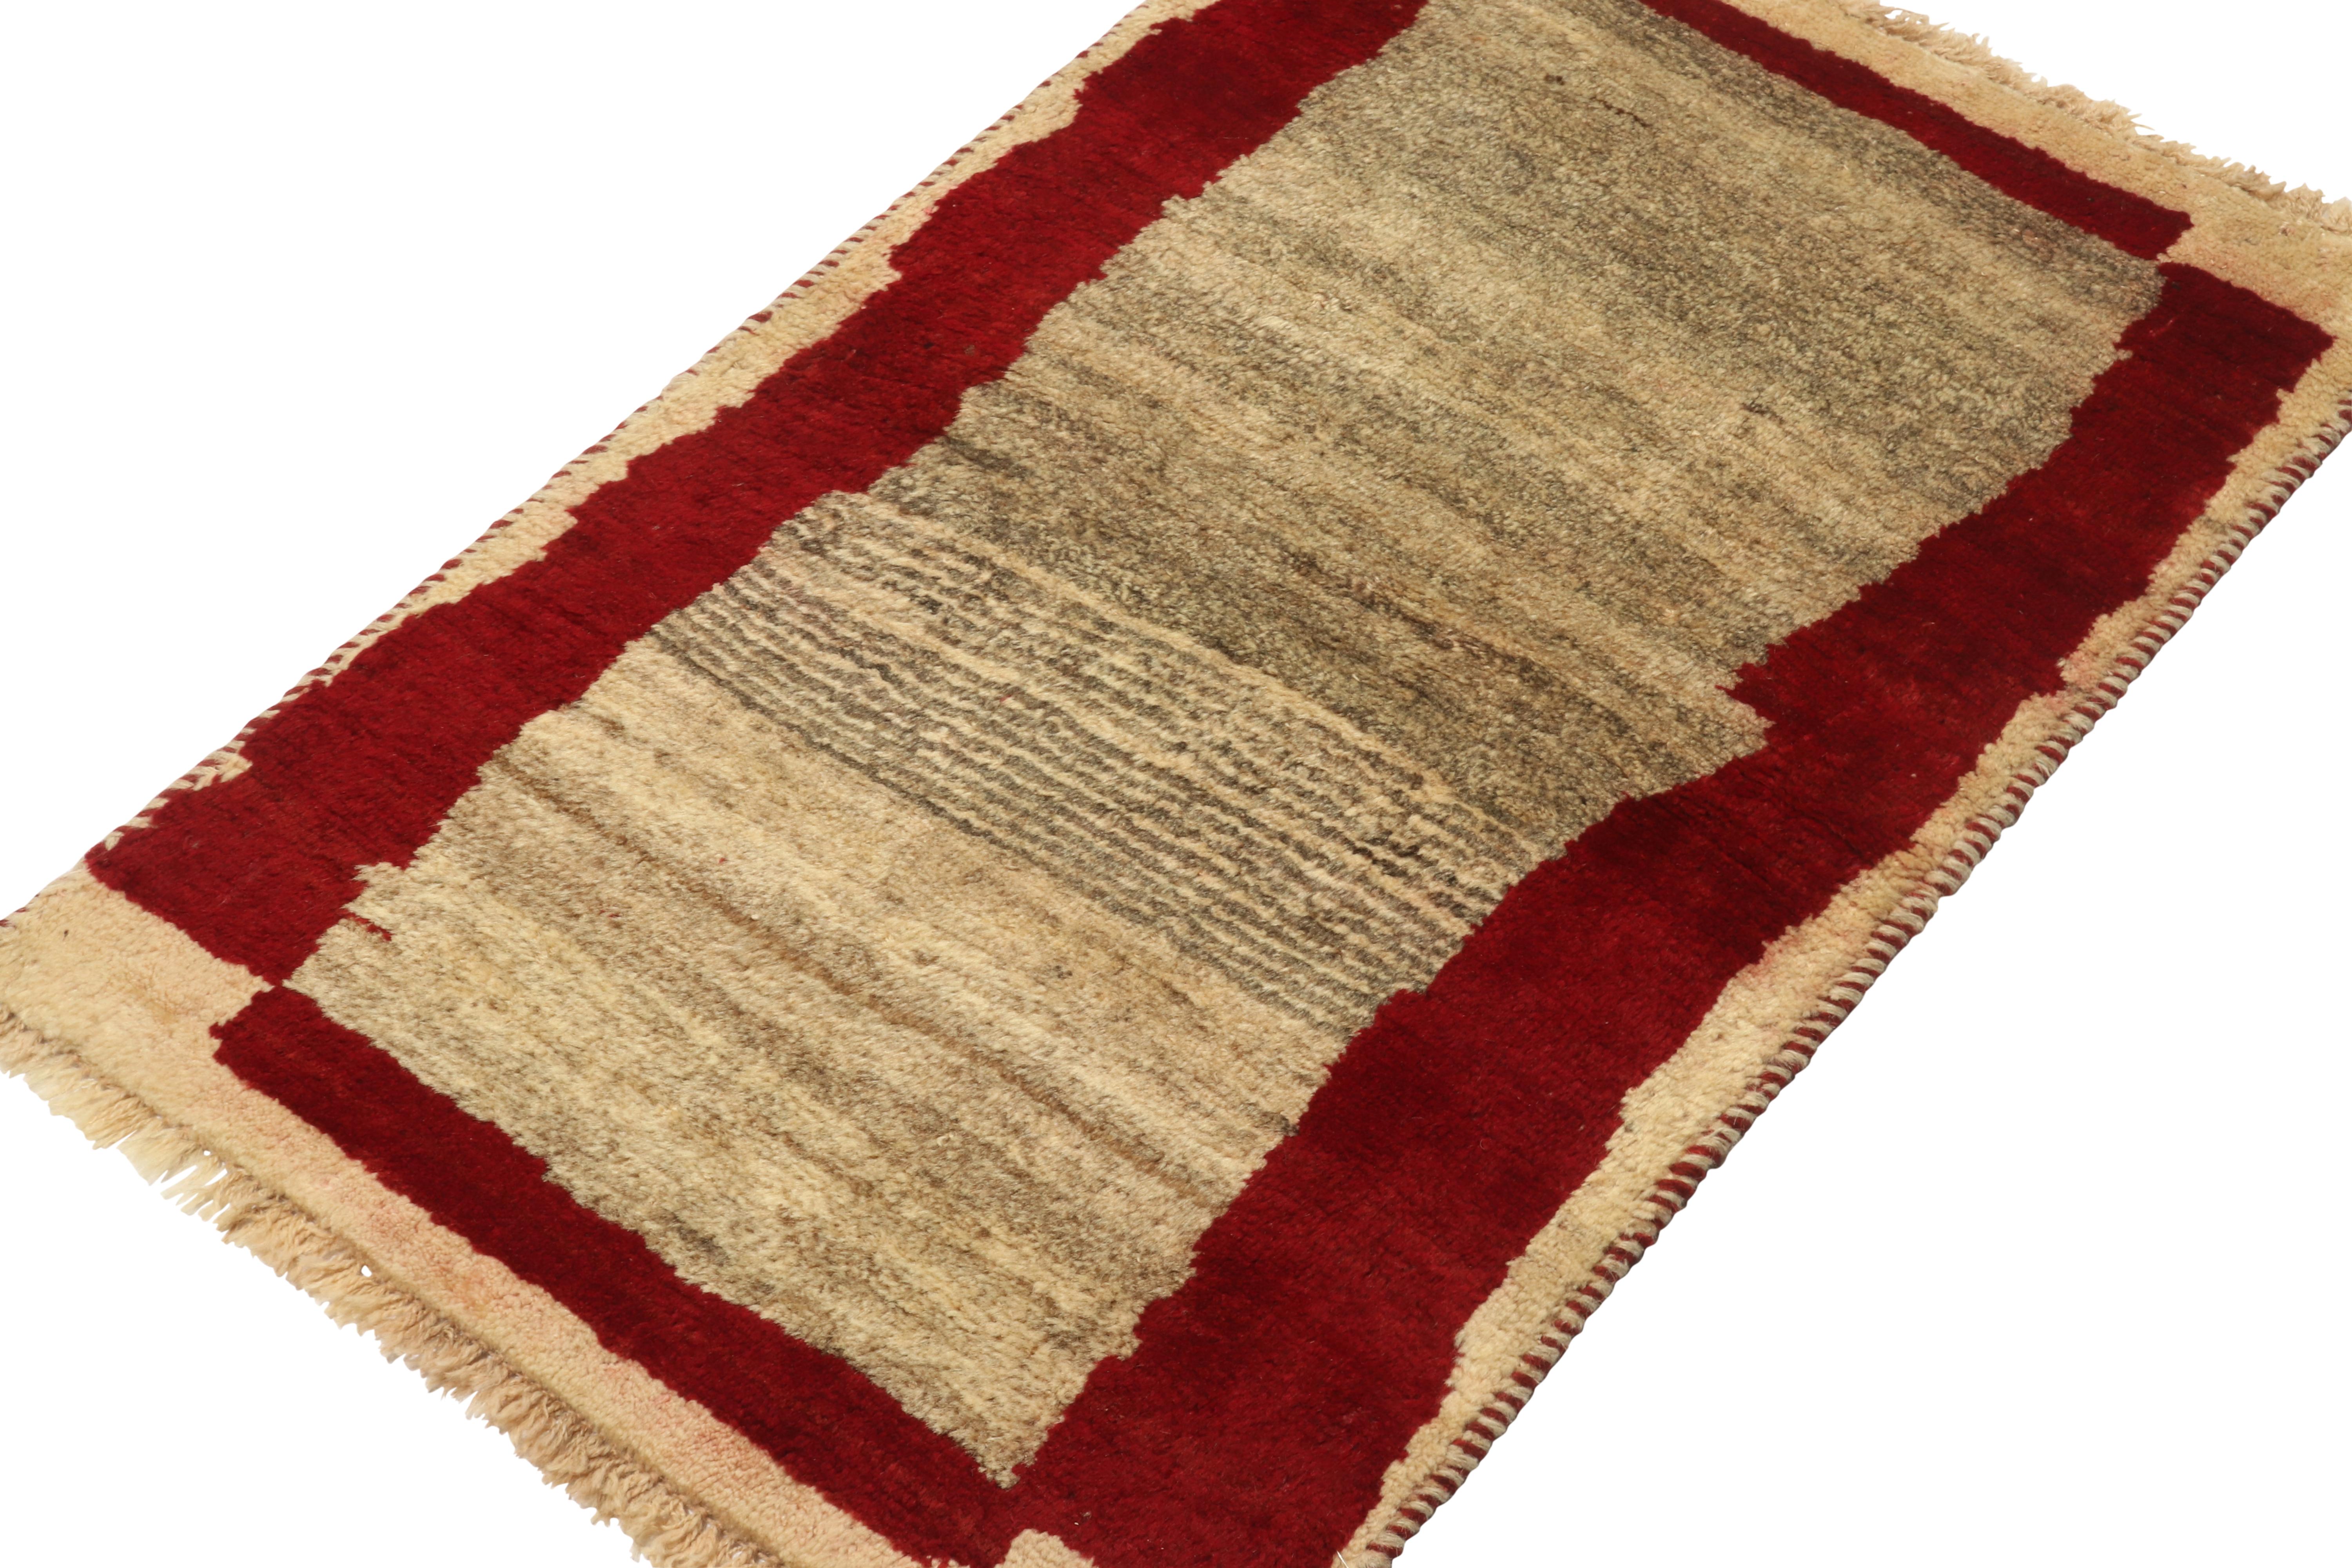 A vintage 2x4 Persian Gabbeh rug in the latest entry to Rug & Kilim’s curation of rare tribal pieces. Hand-knotted in wool circa 1950-1960.

On the Design:

This piece emanates a comfortable sensibility with a minimalist open field relishing